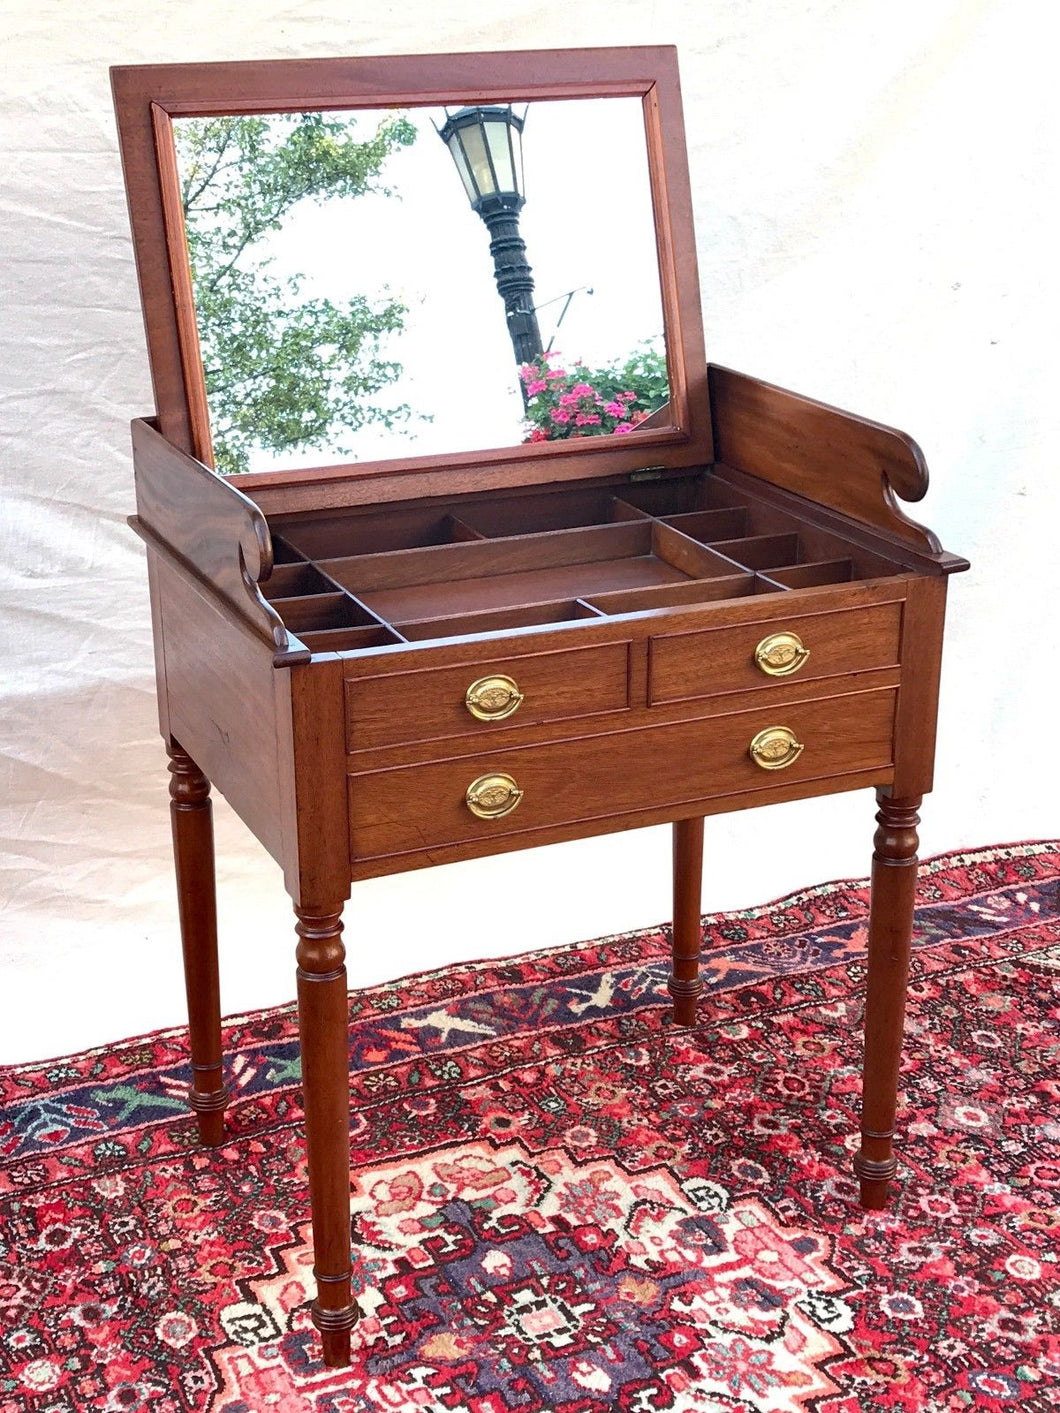 FINE CHIPPENDALE STYLED MAHOGANY VANITY-SHAVING STAND WITH SCROLLED GALLEY-LOOK!